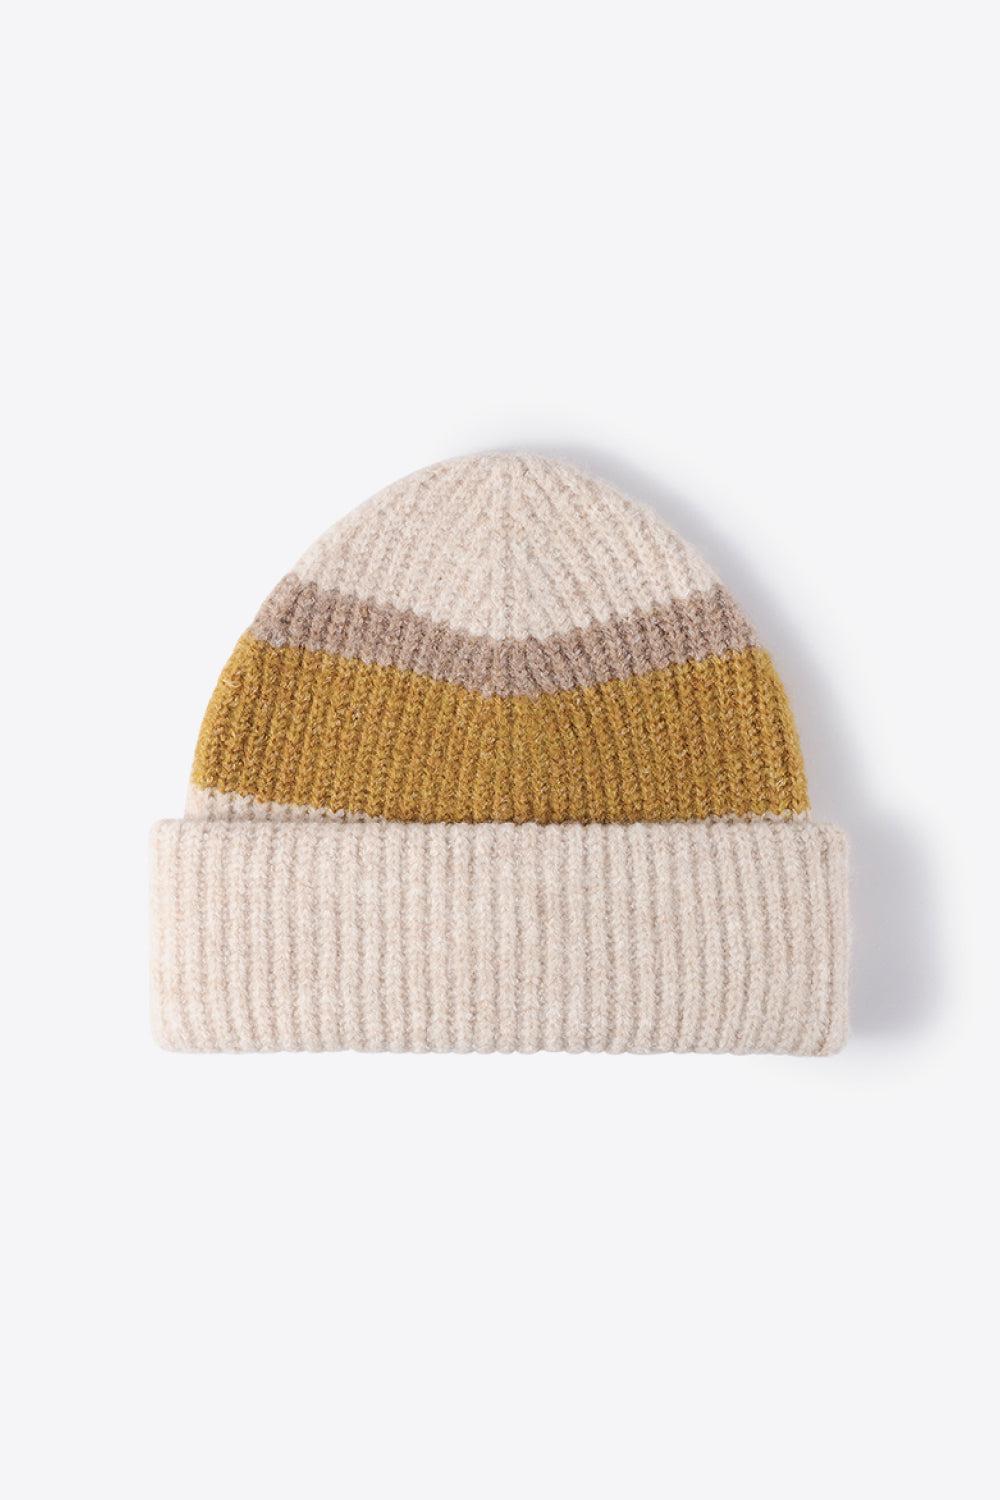 Tricolor Cuffed Knit Beanie-Beanies-[Adult]-[Female]-Beige/Mustard-One Size-2022 Online Blue Zone Planet